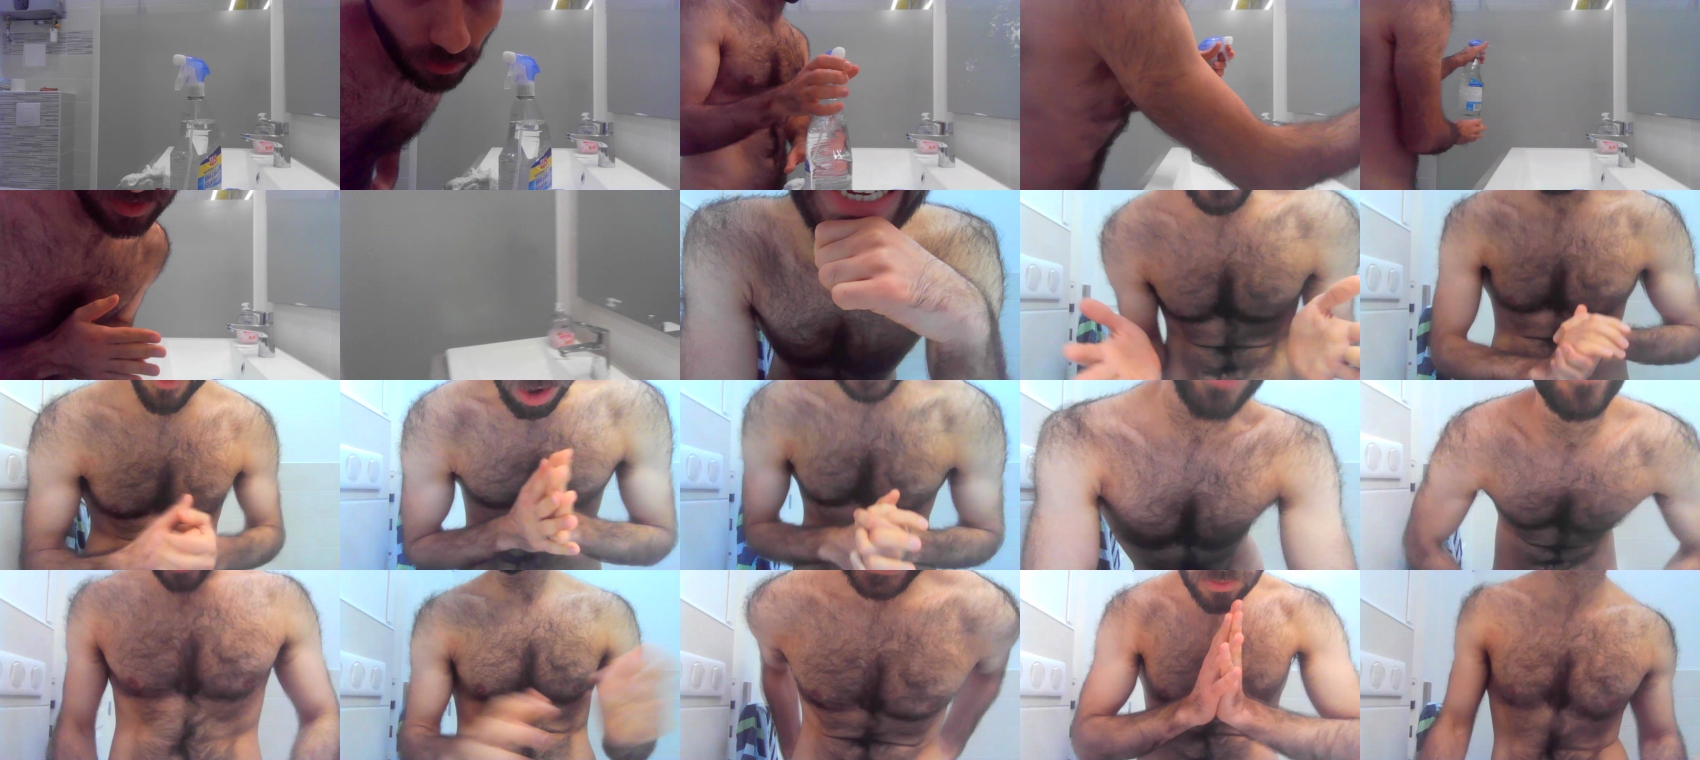 Hairy_sexy_man  09-01-2022 Recorded Video bicurious